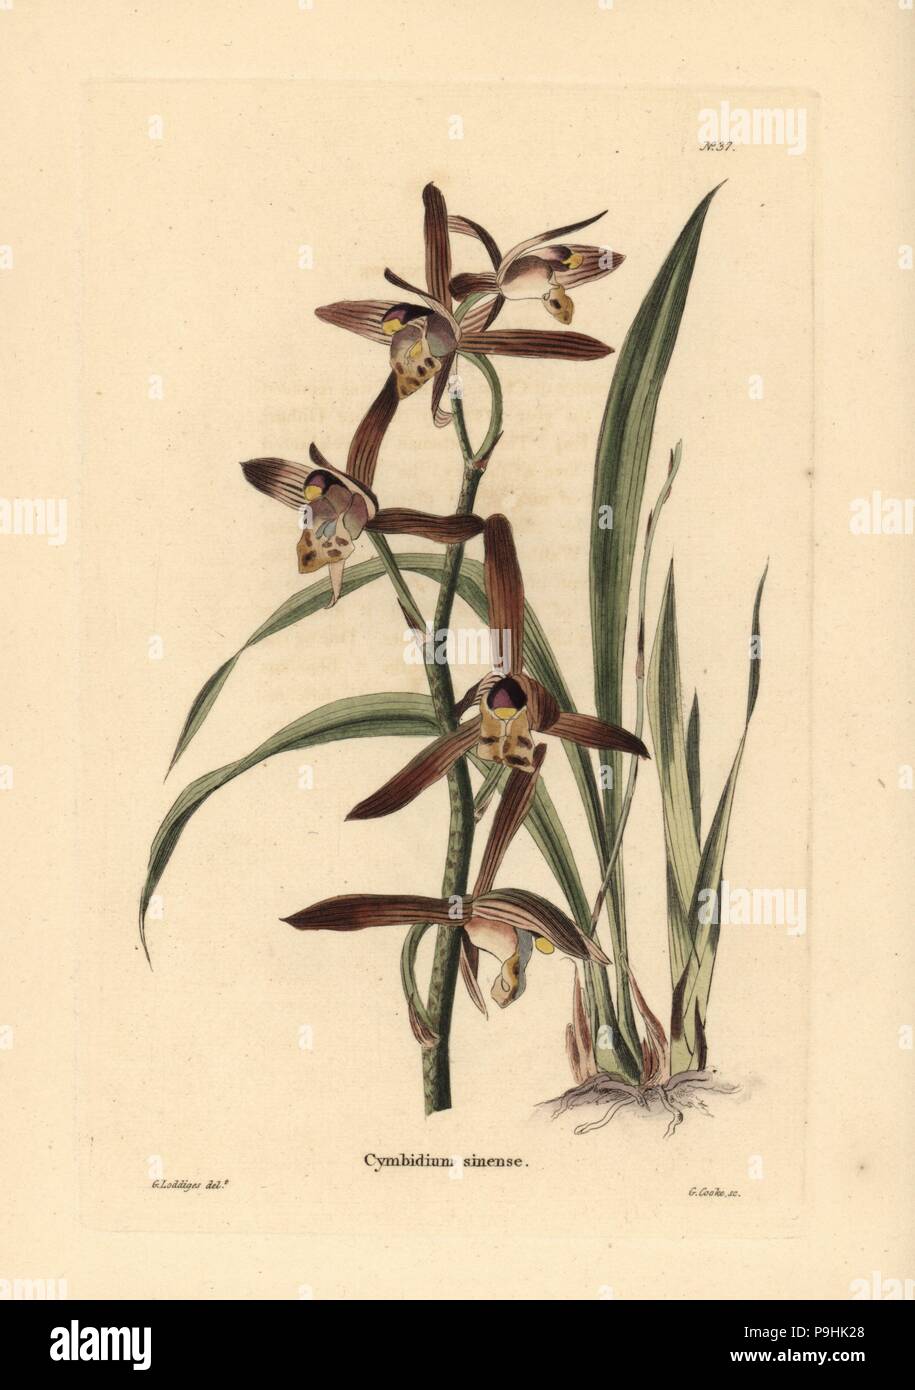 Chinese cymbidium orchid, Cymbidium sinense. Handcoloured copperplate engraving by George Cooke after George Loddiges from Conrad Loddiges' Botanical Cabinet, Hackney, 1817. Stock Photo